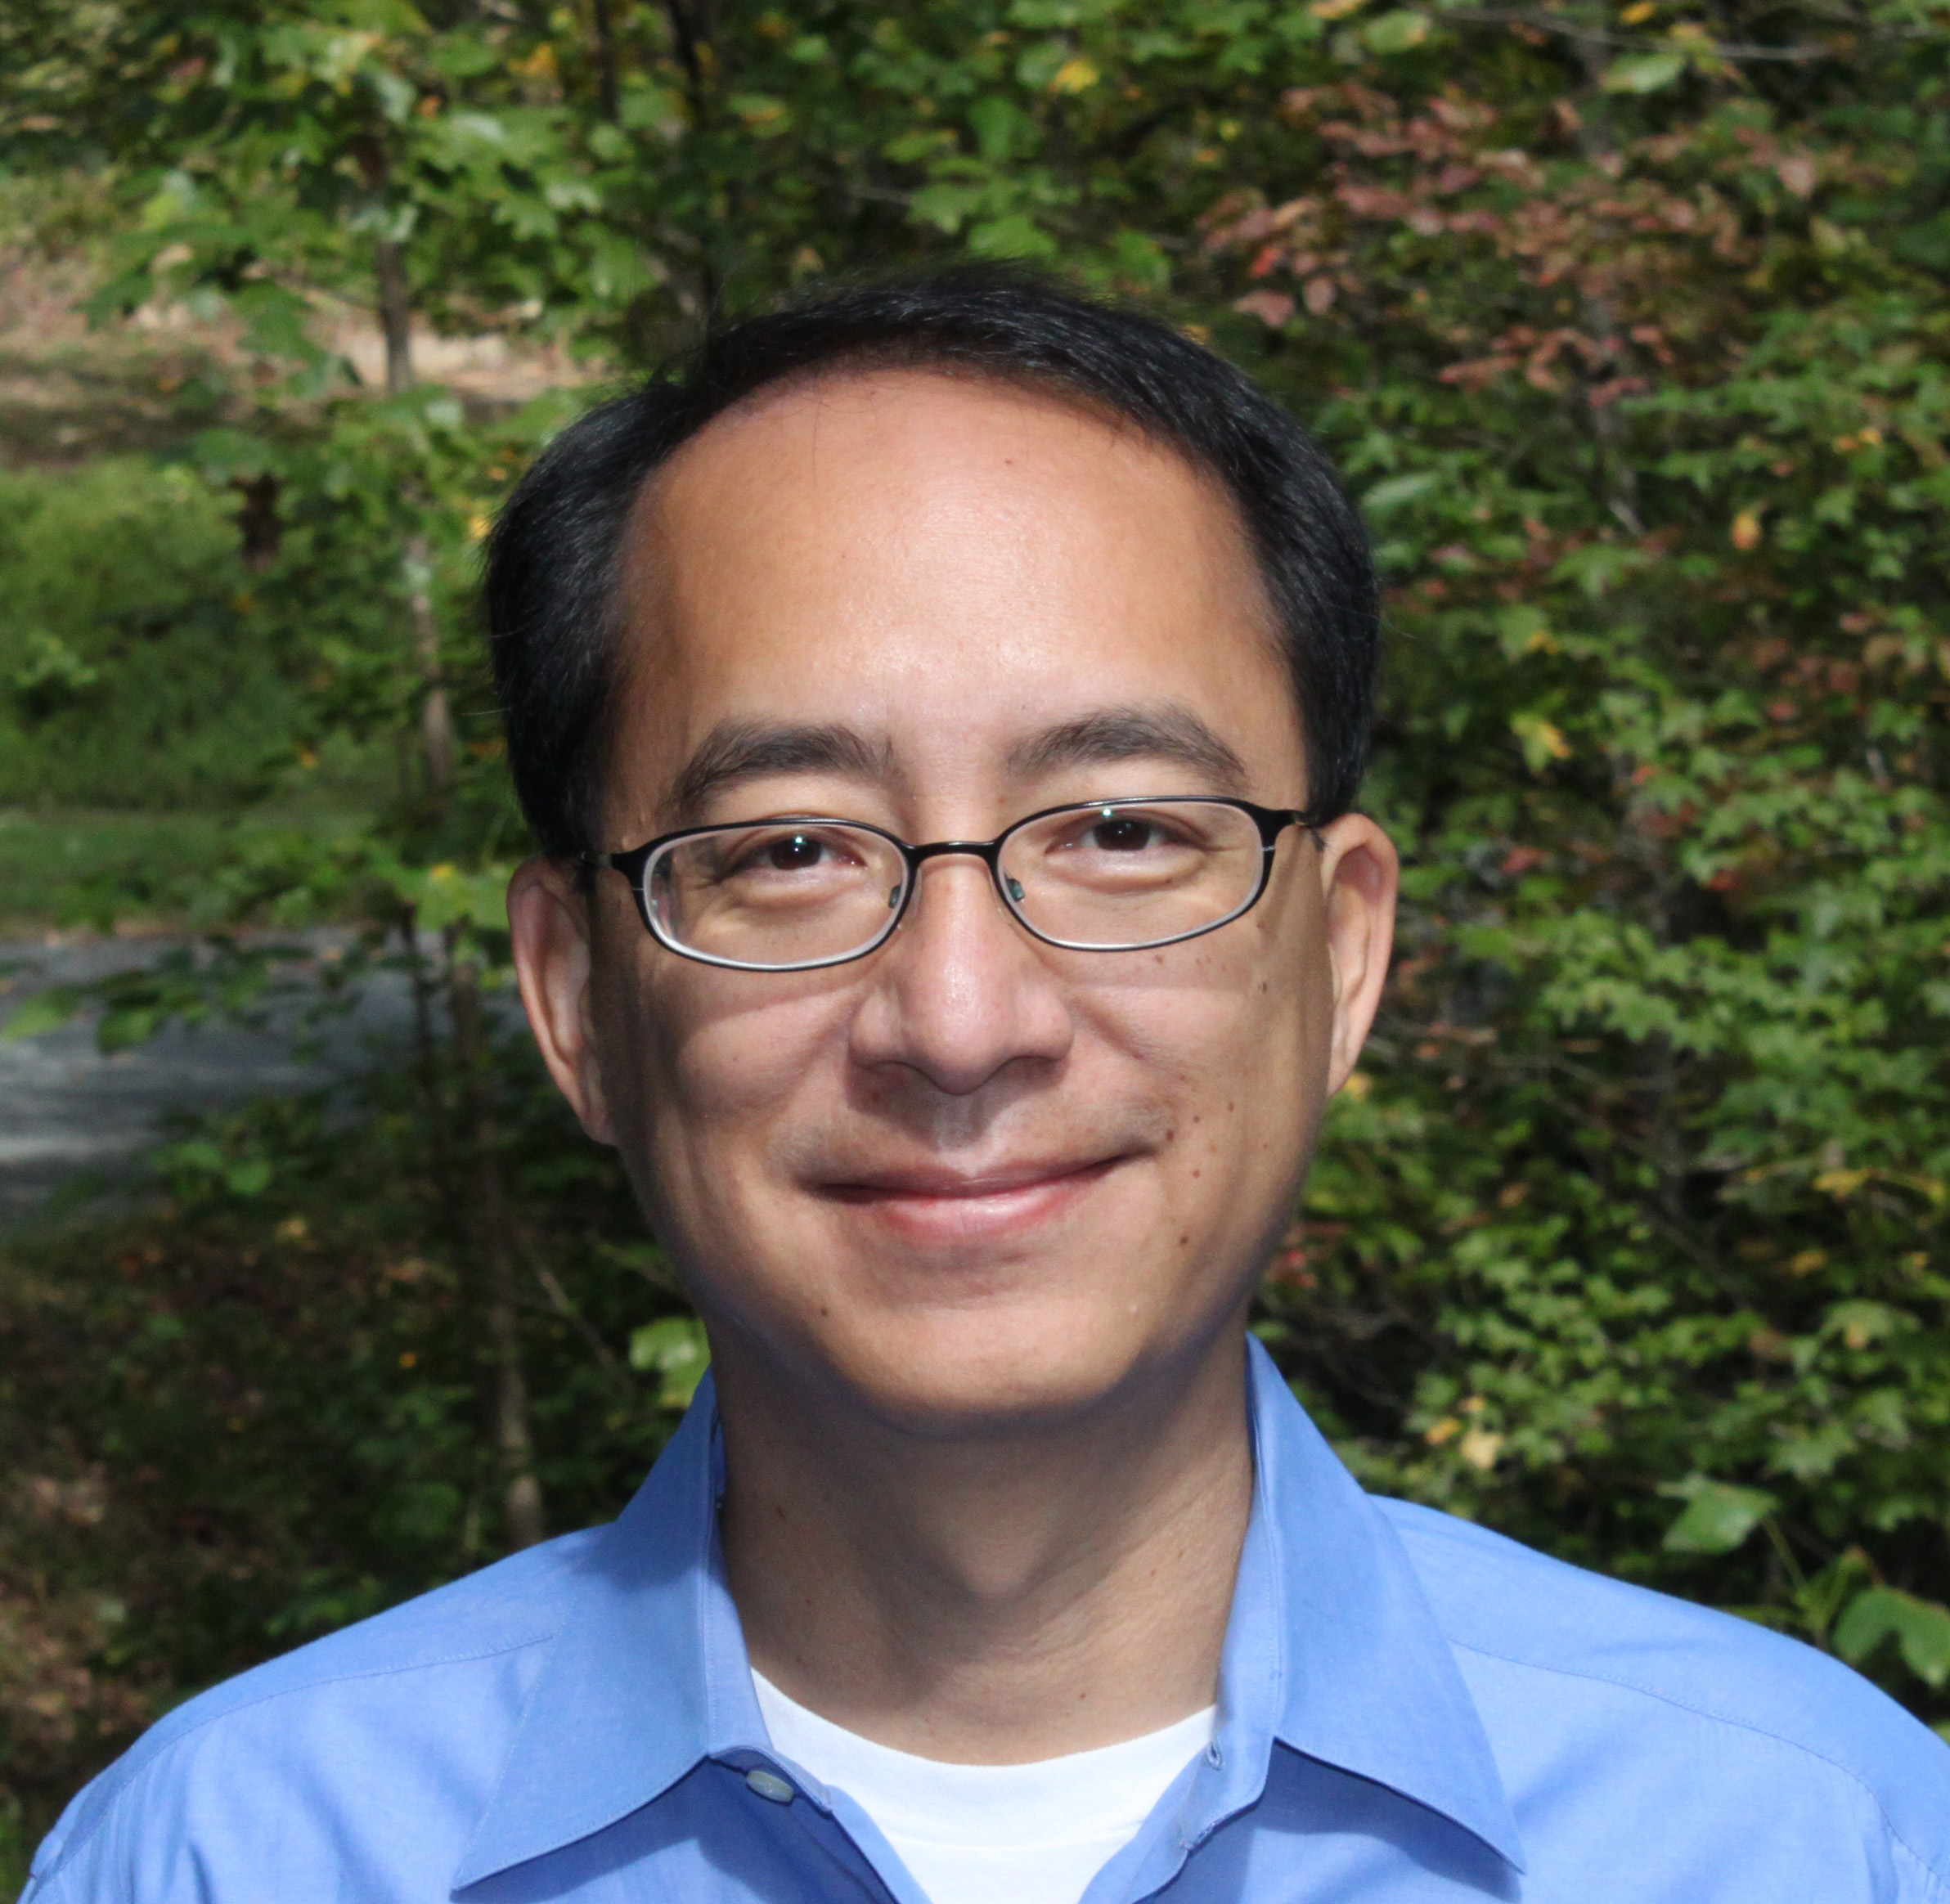 Dr. Donald Lo, Associate Professor in the Department of Neurobiology at Duke University Medical Center, VP of nonprofit HD Reach and Director of Duke Center for Drug Discovery